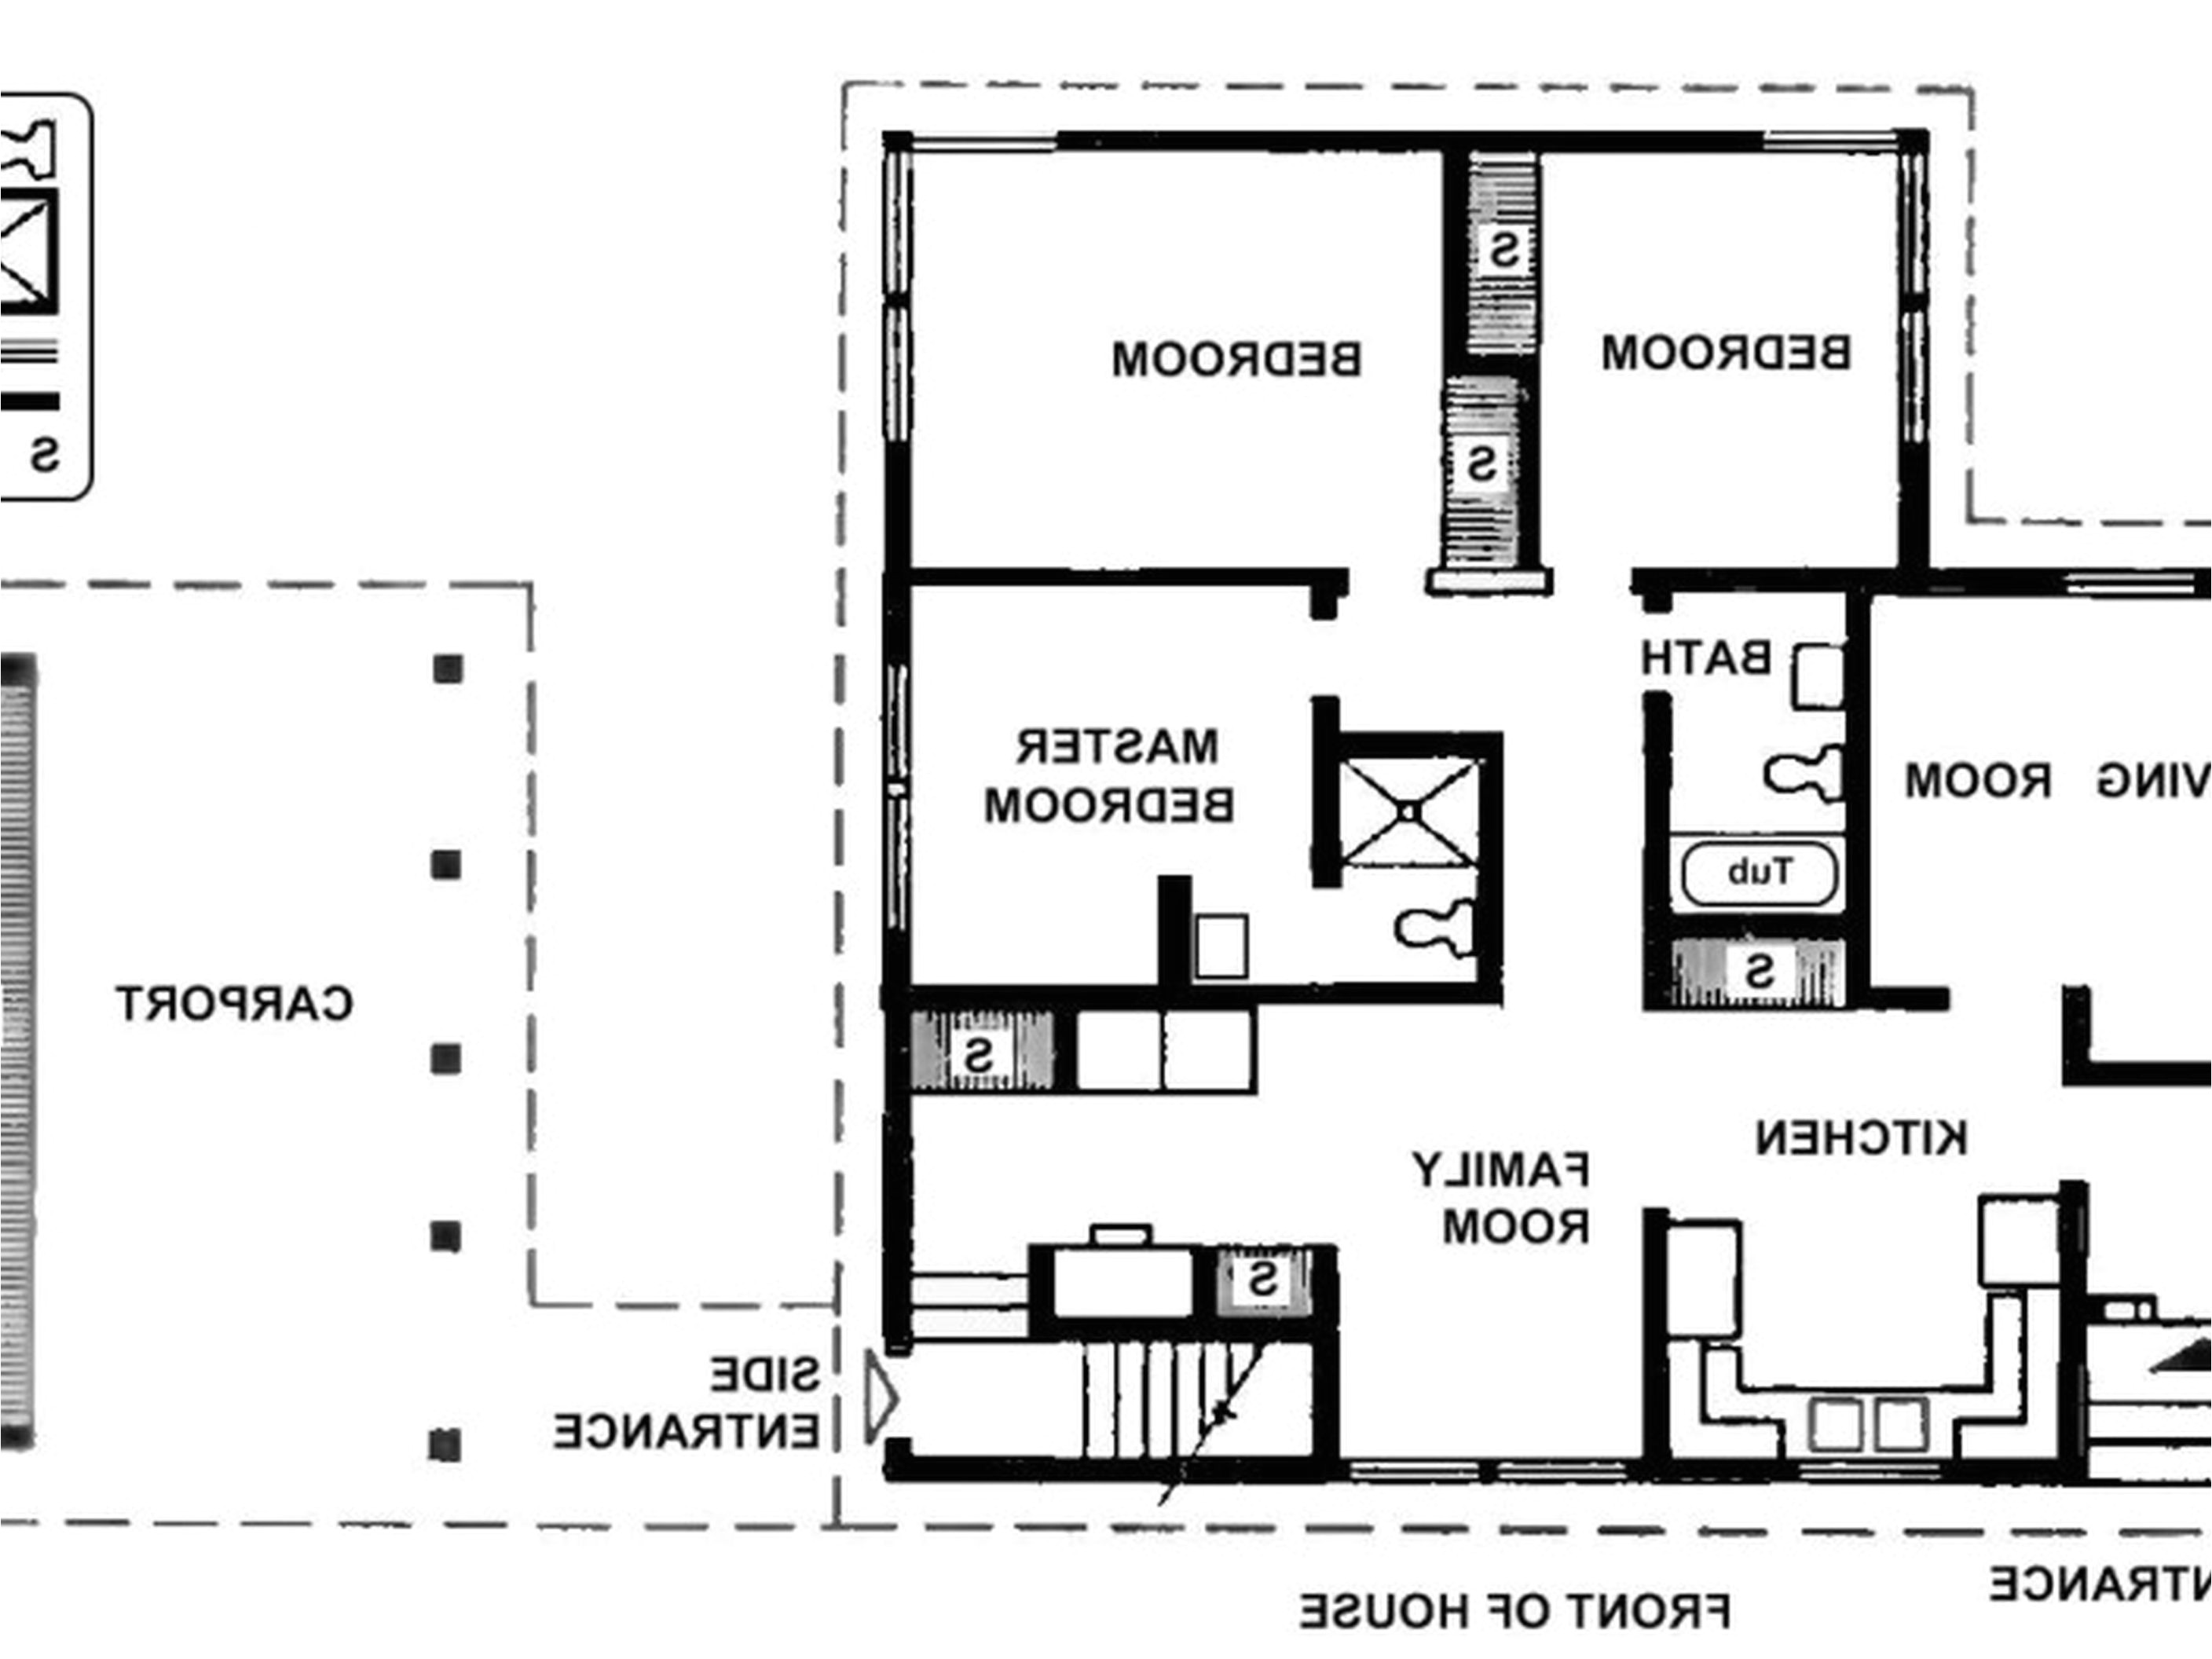 design your own home plans online free